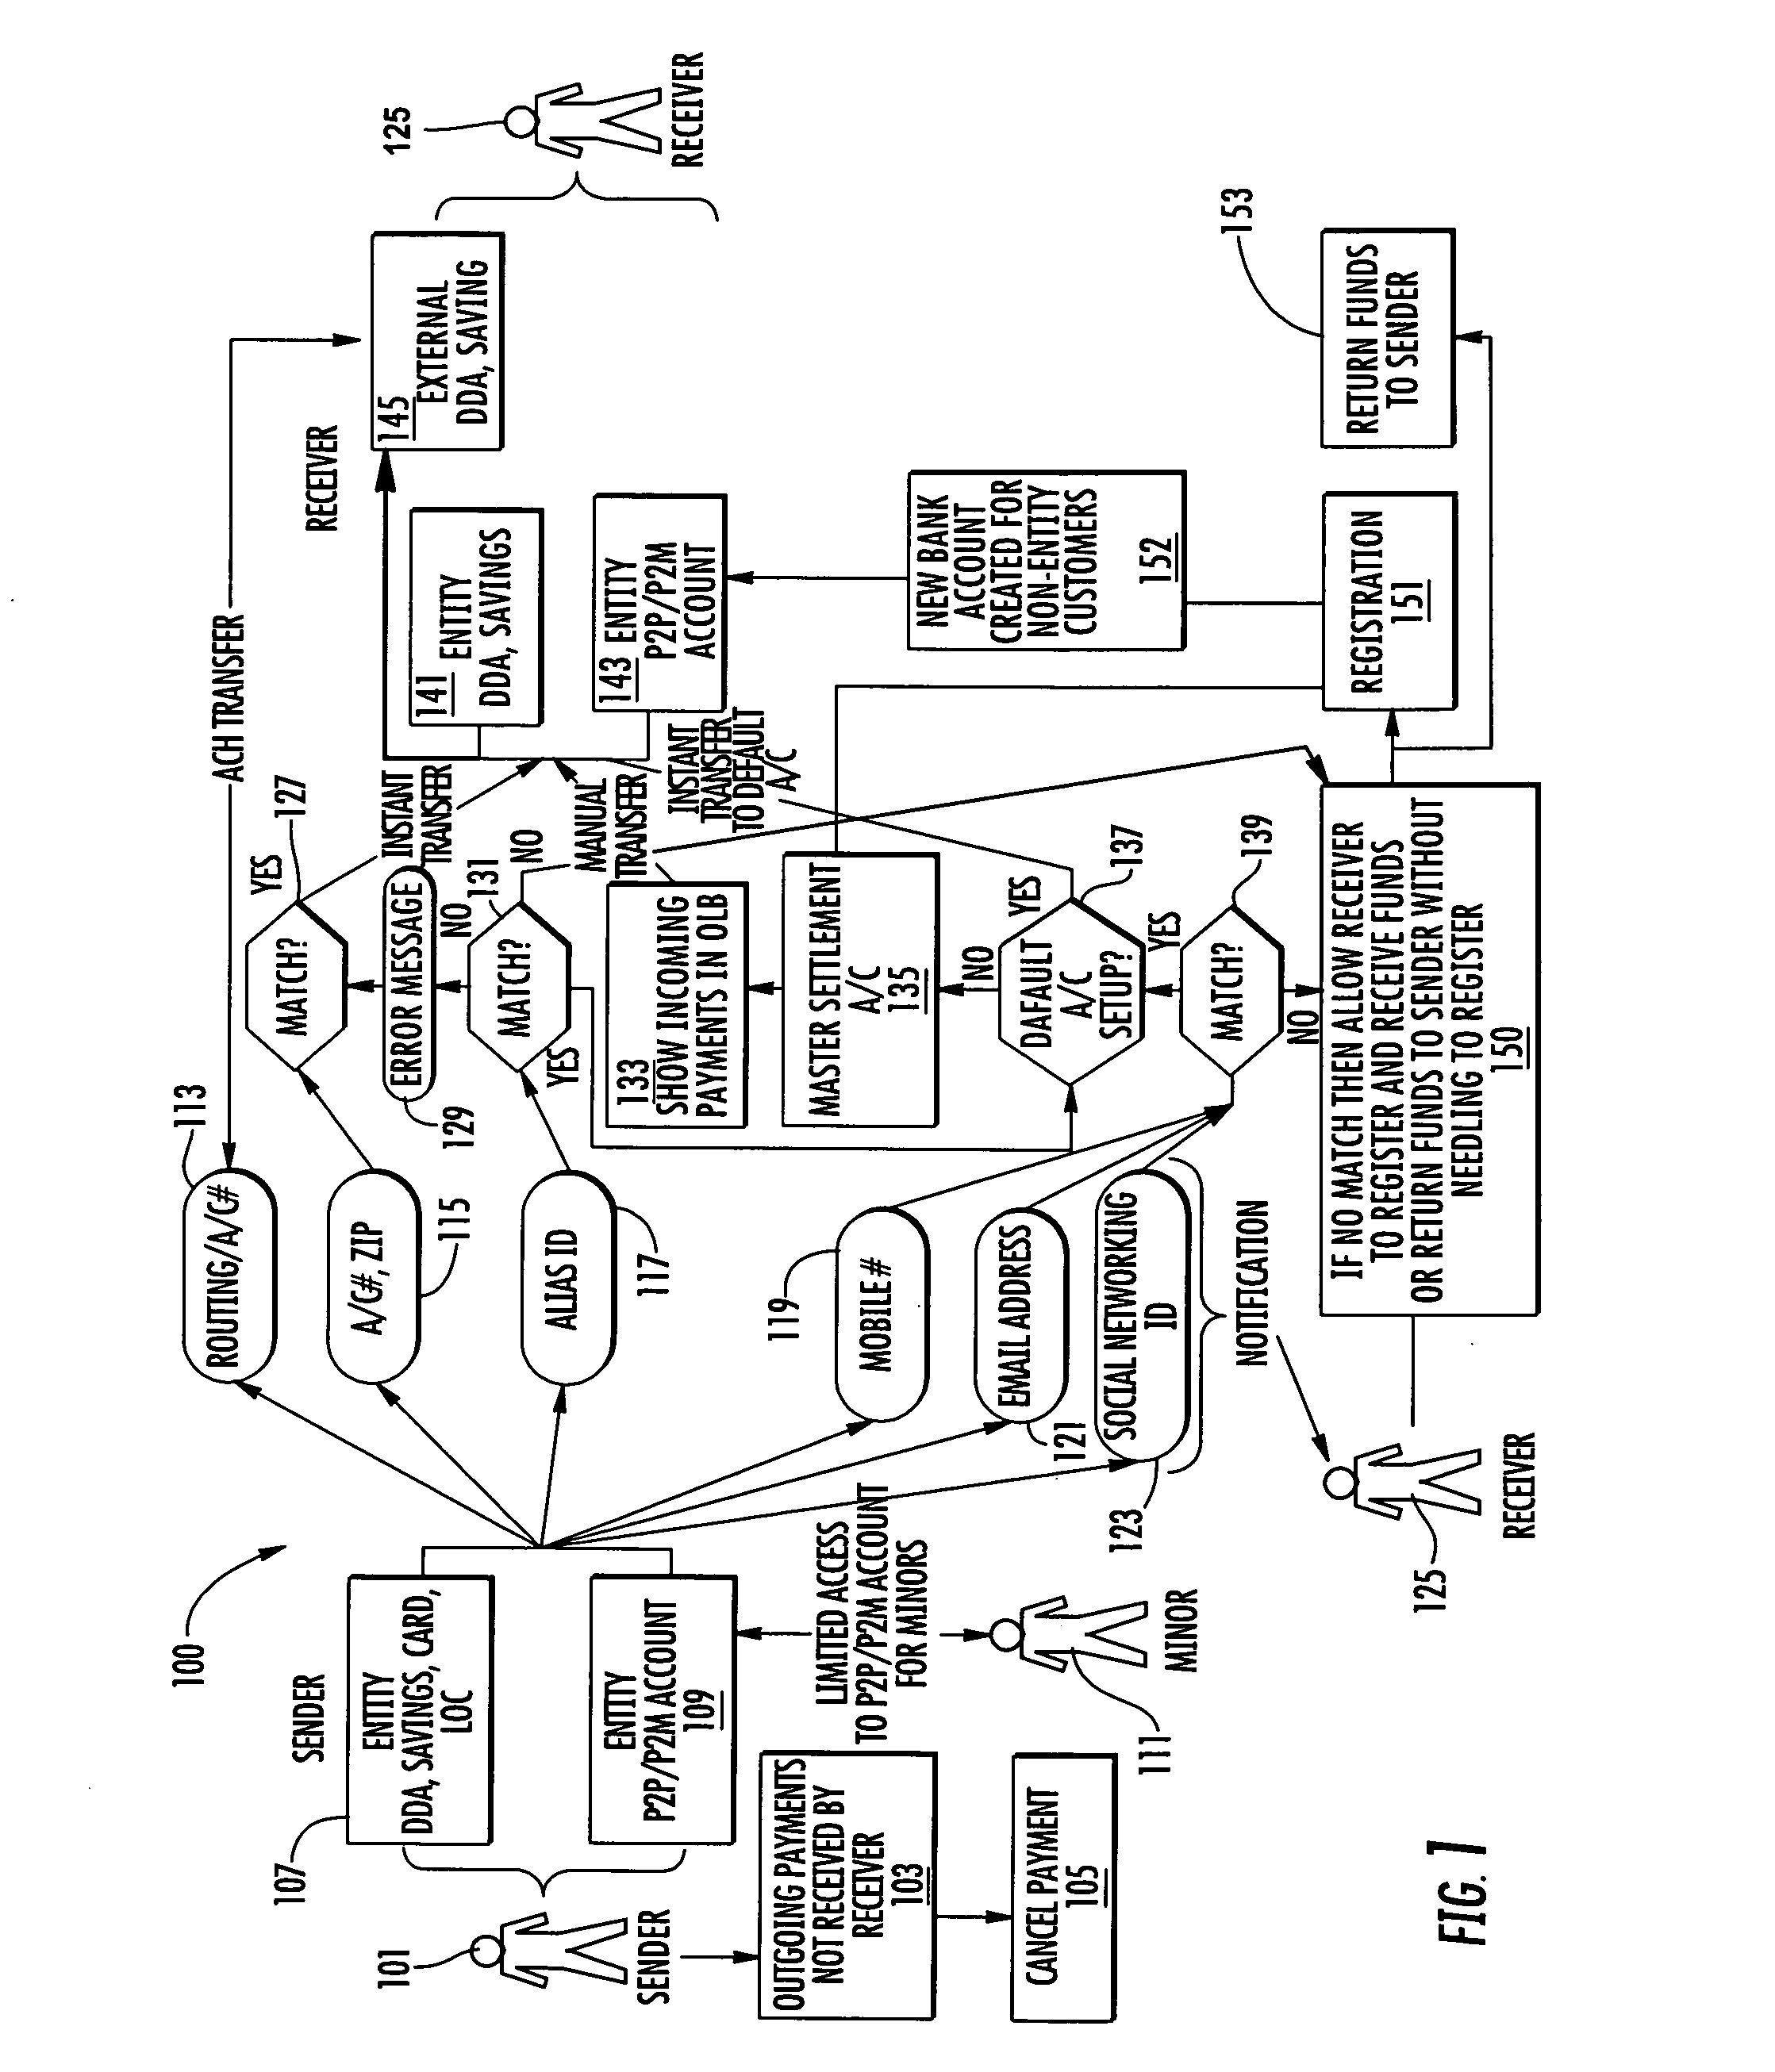 Online payment system and method